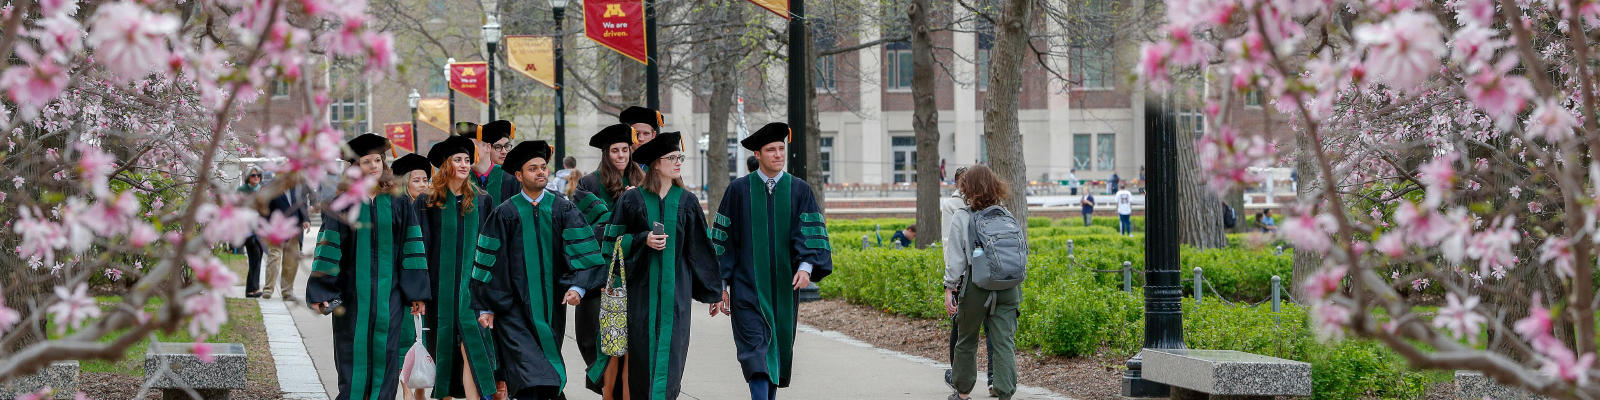 Graduates in robes walk along Northrop Mall lined with flowering trees